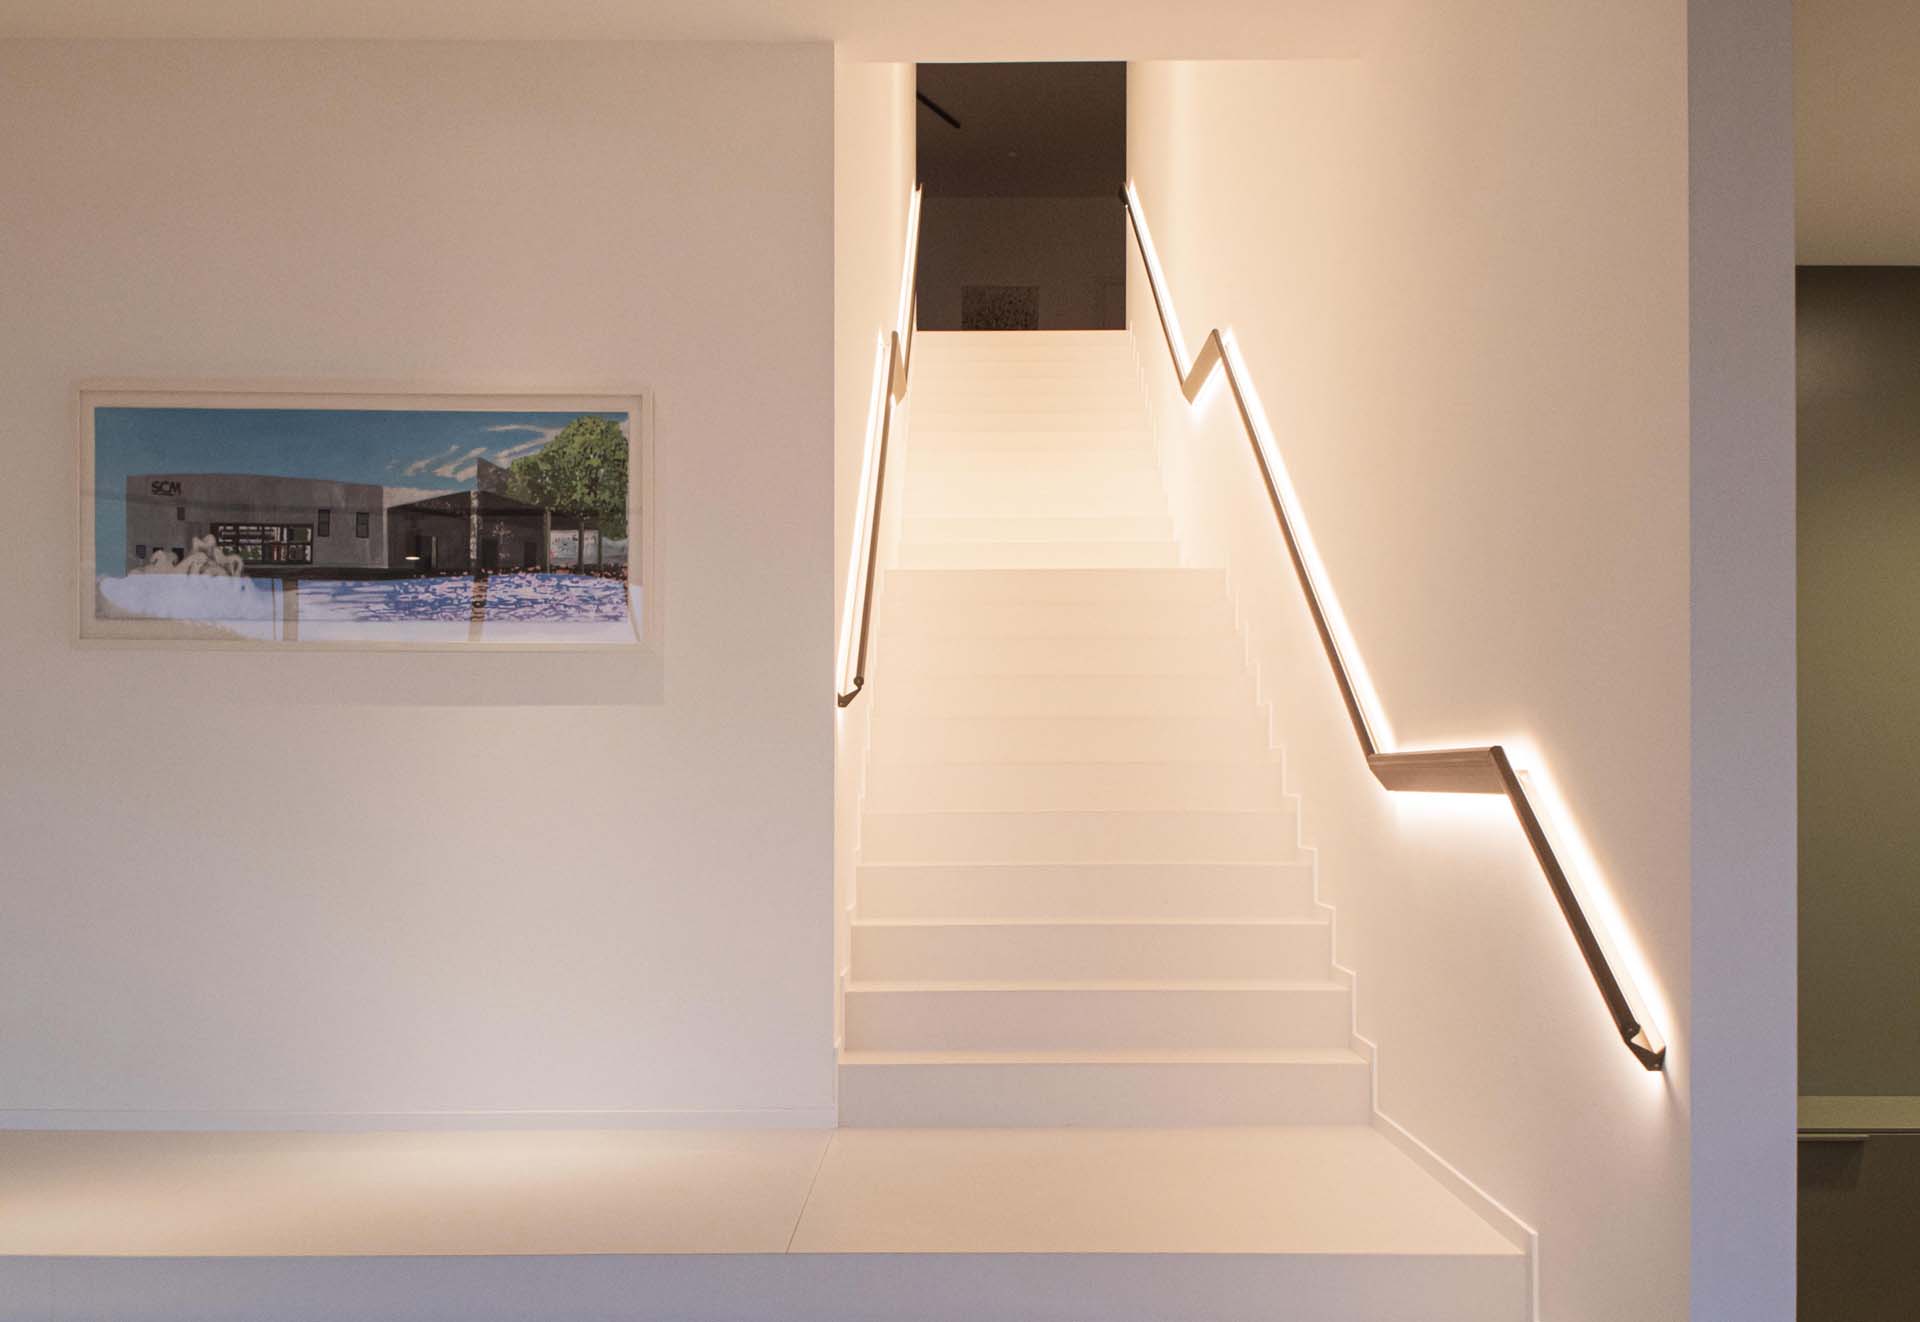 A modern handrail with hidden lighting that casts onto the wall and floor.